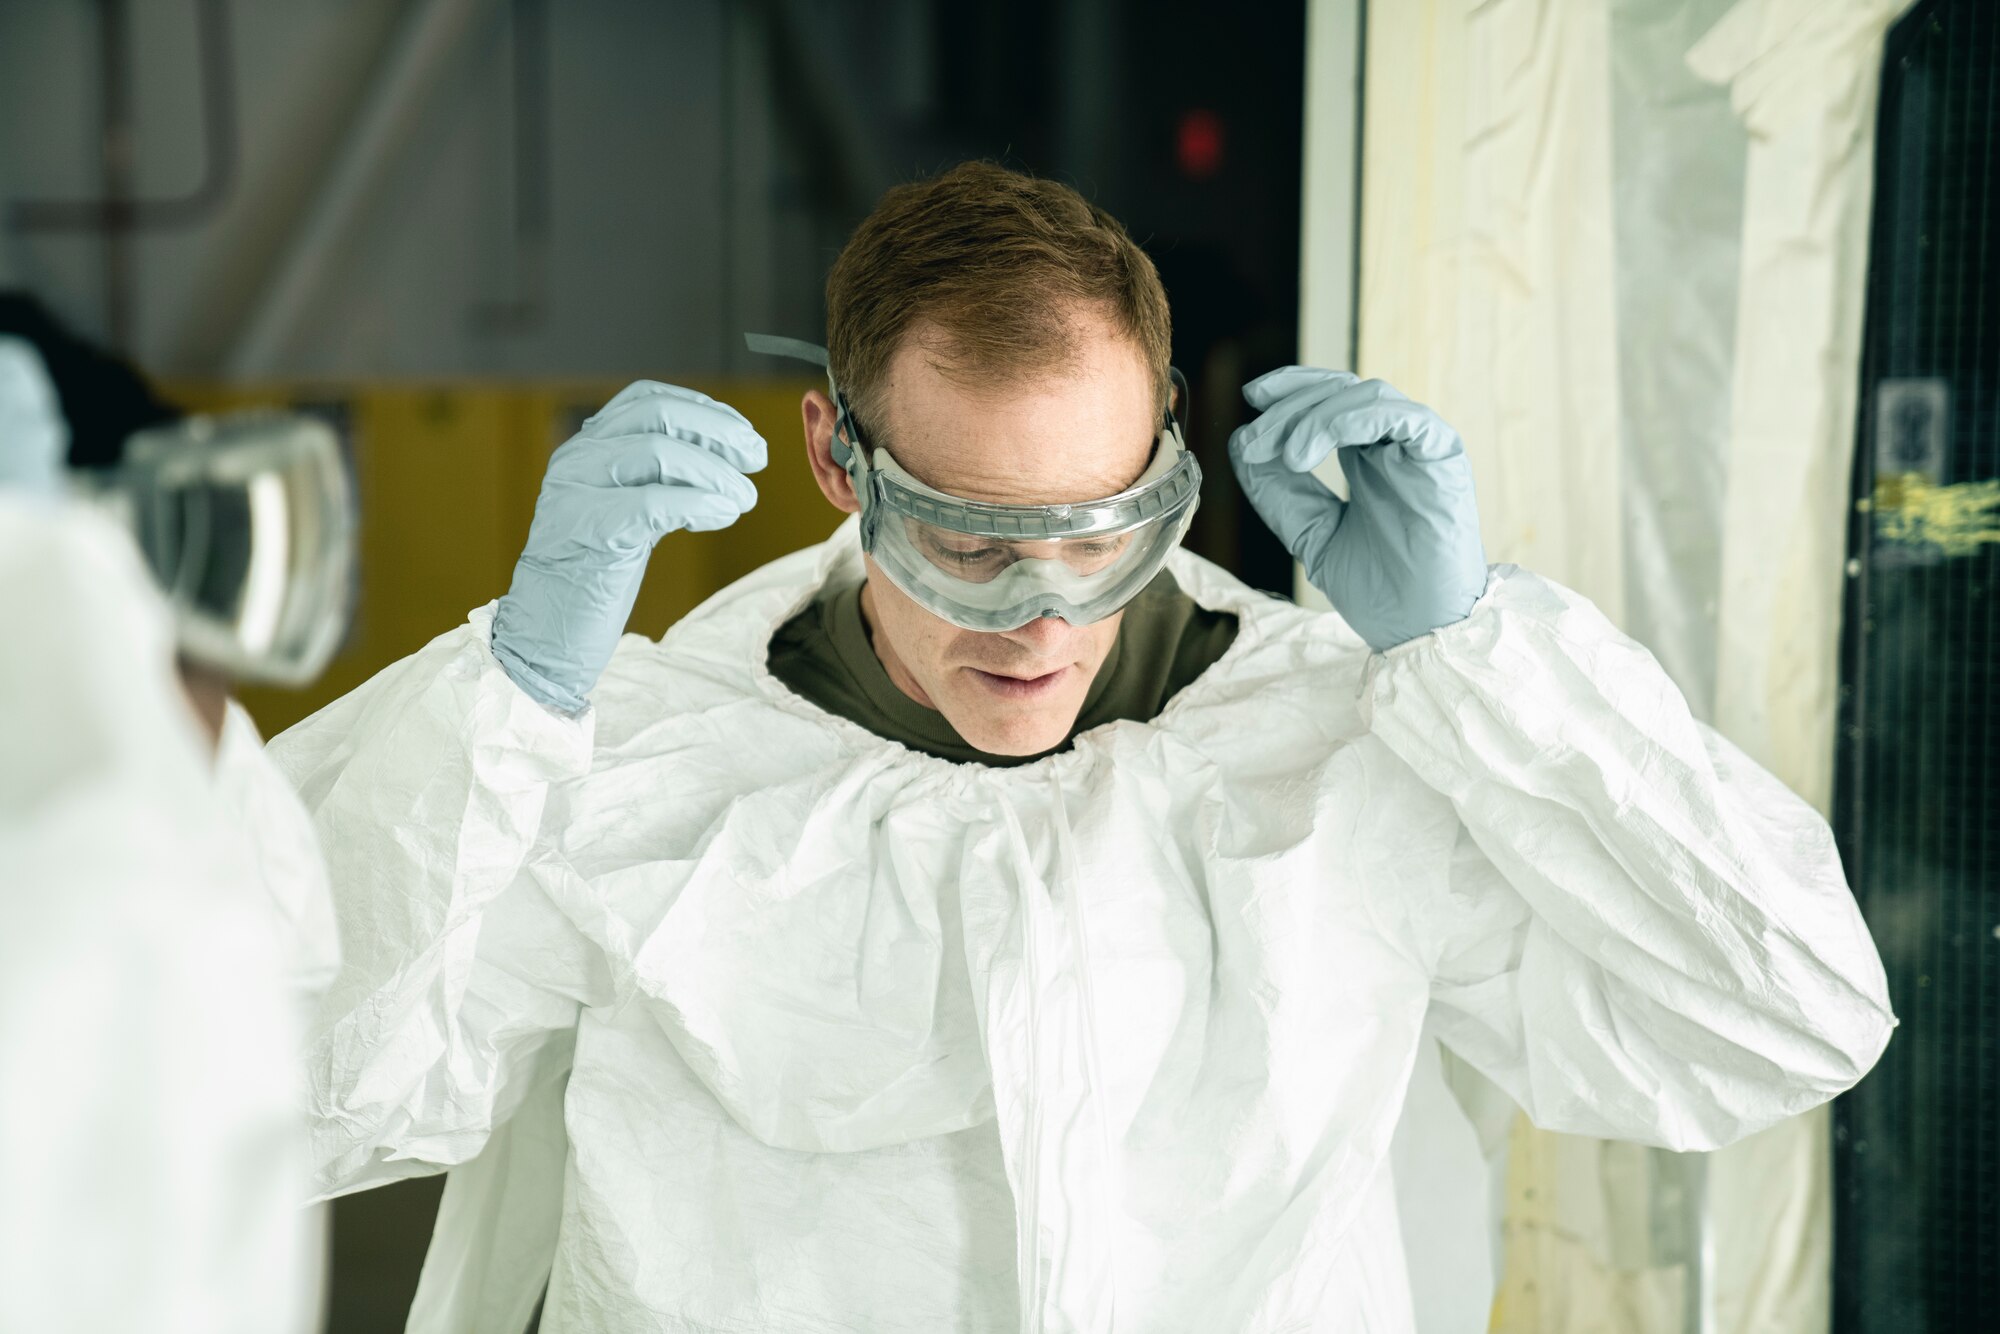 U.S. Air Force Col. Benjamin Jonsson, 6th Air Refueling Wing commander, puts on personal protective equipment prior to painting aircraft parts in the corrosion control facility at MacDill Air Force Base, Florida, April 28, 2022.